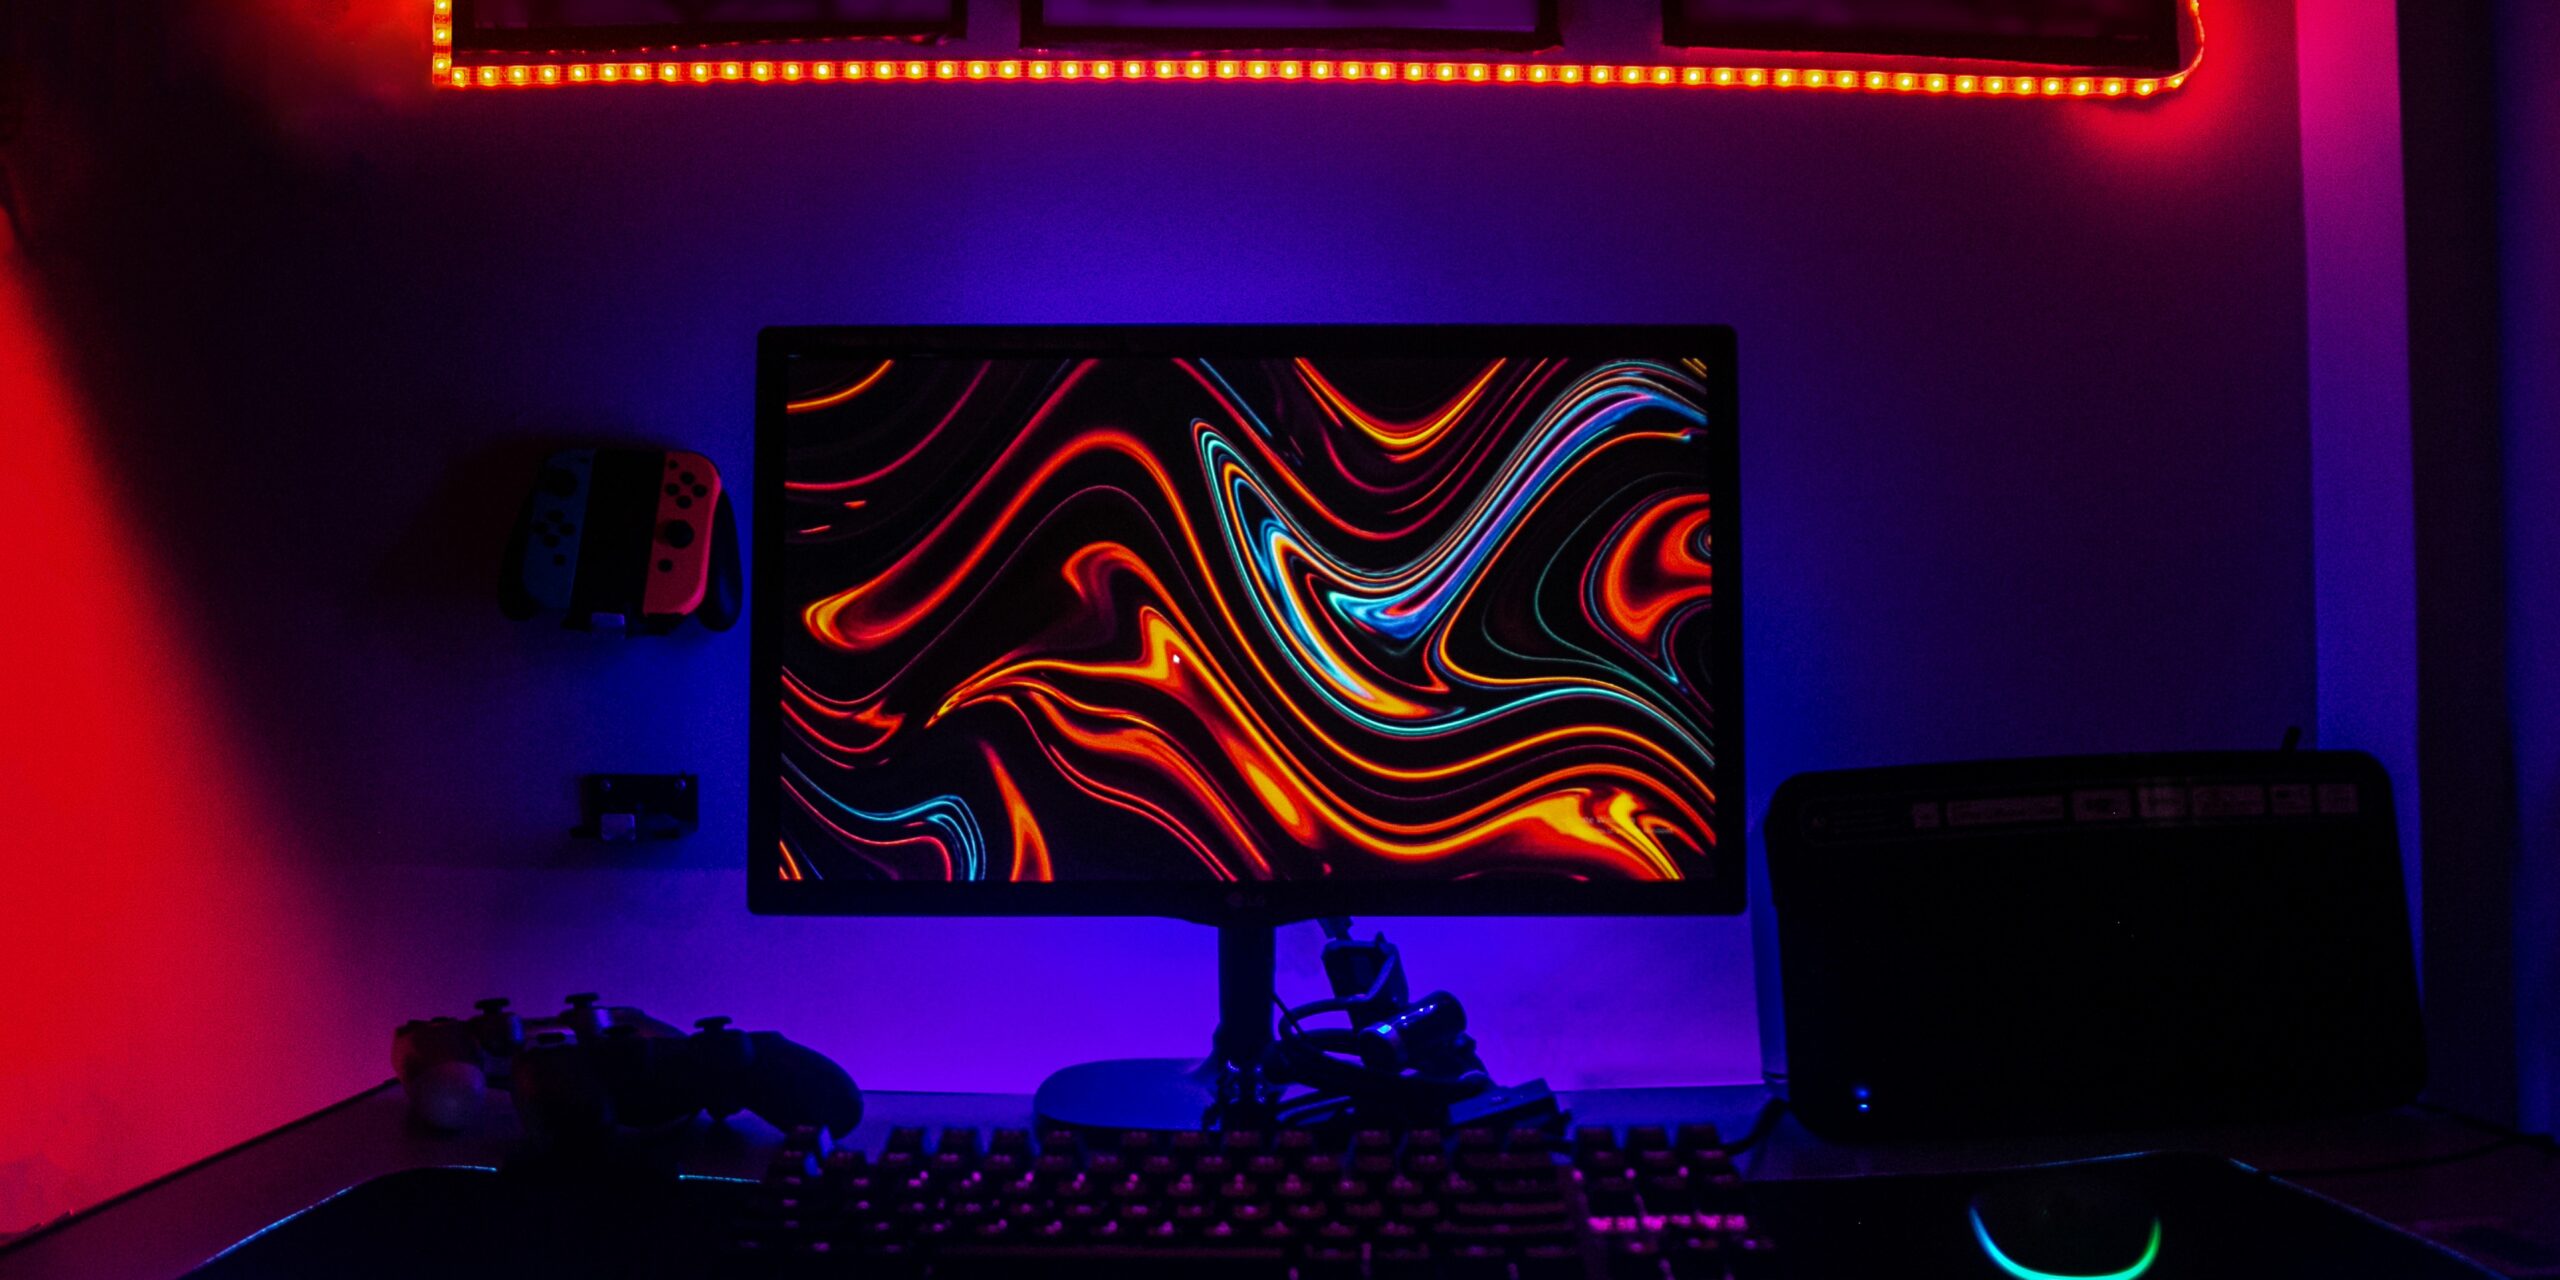 Factors to Consider When Buying a Large Monitor